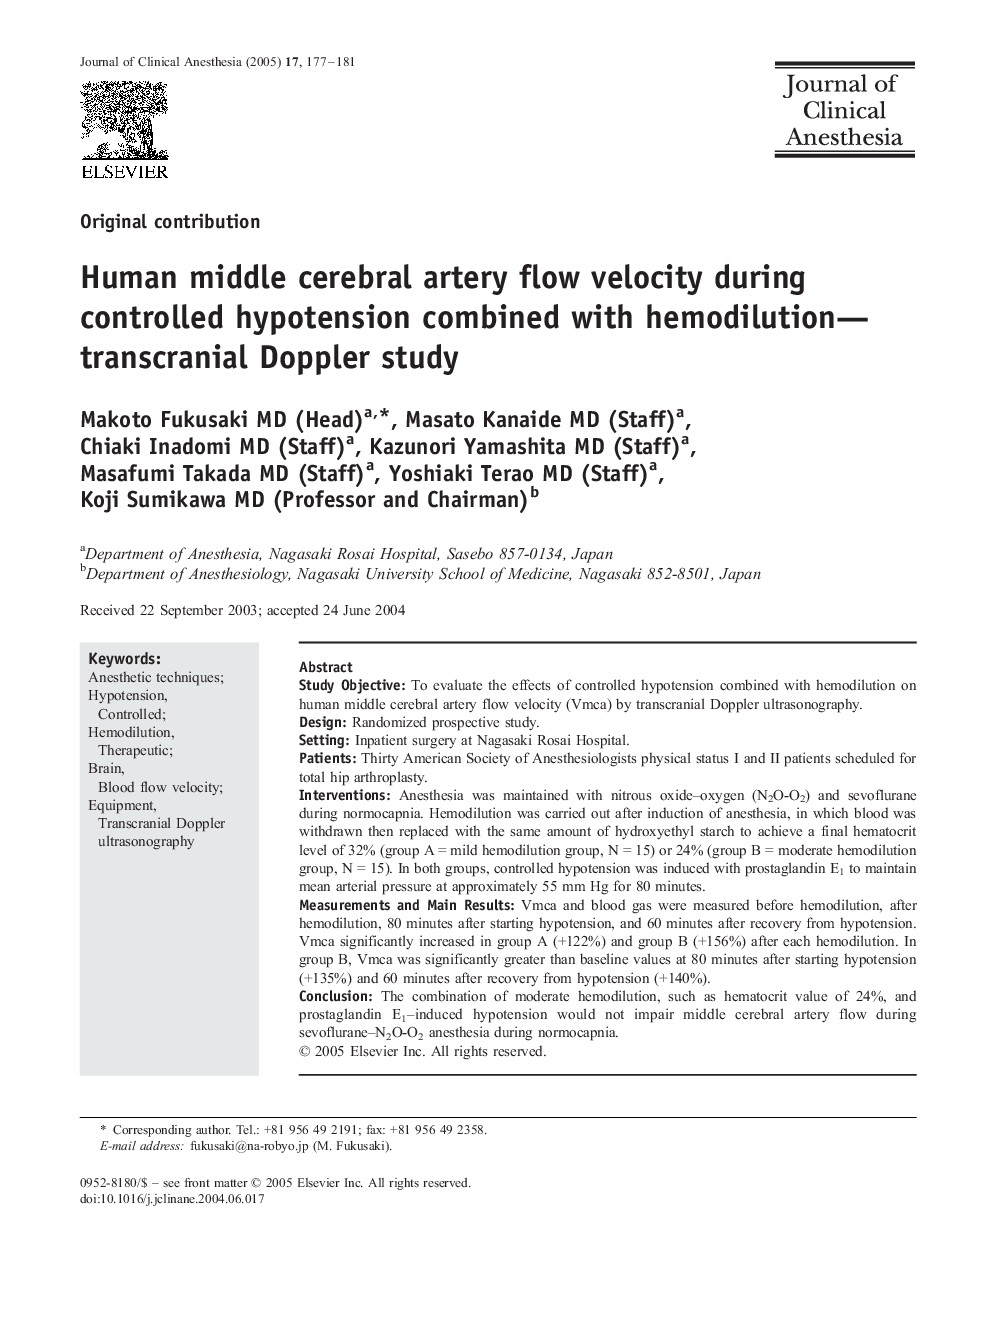 Human middle cerebral artery flow velocity during controlled hypotension combined with hemodilution-transcranial Doppler study